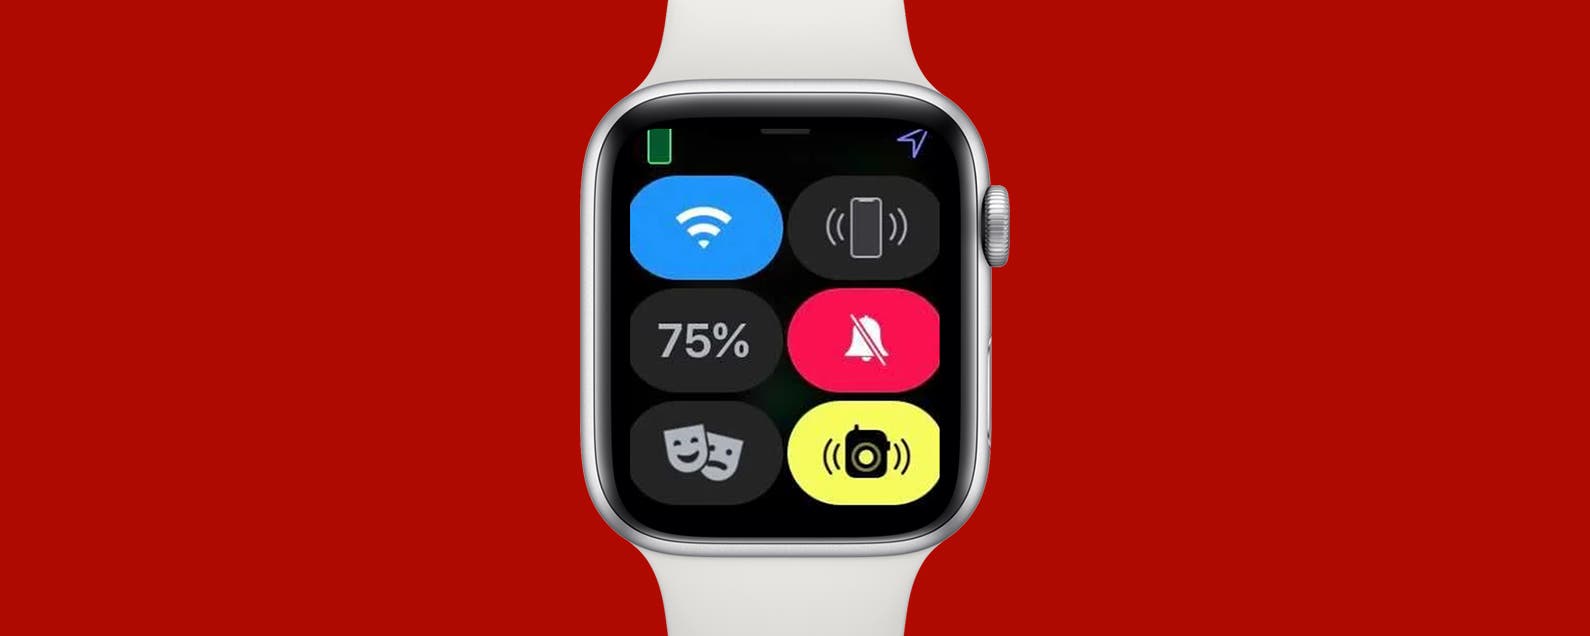 How to Check Apple Watch Battery Life